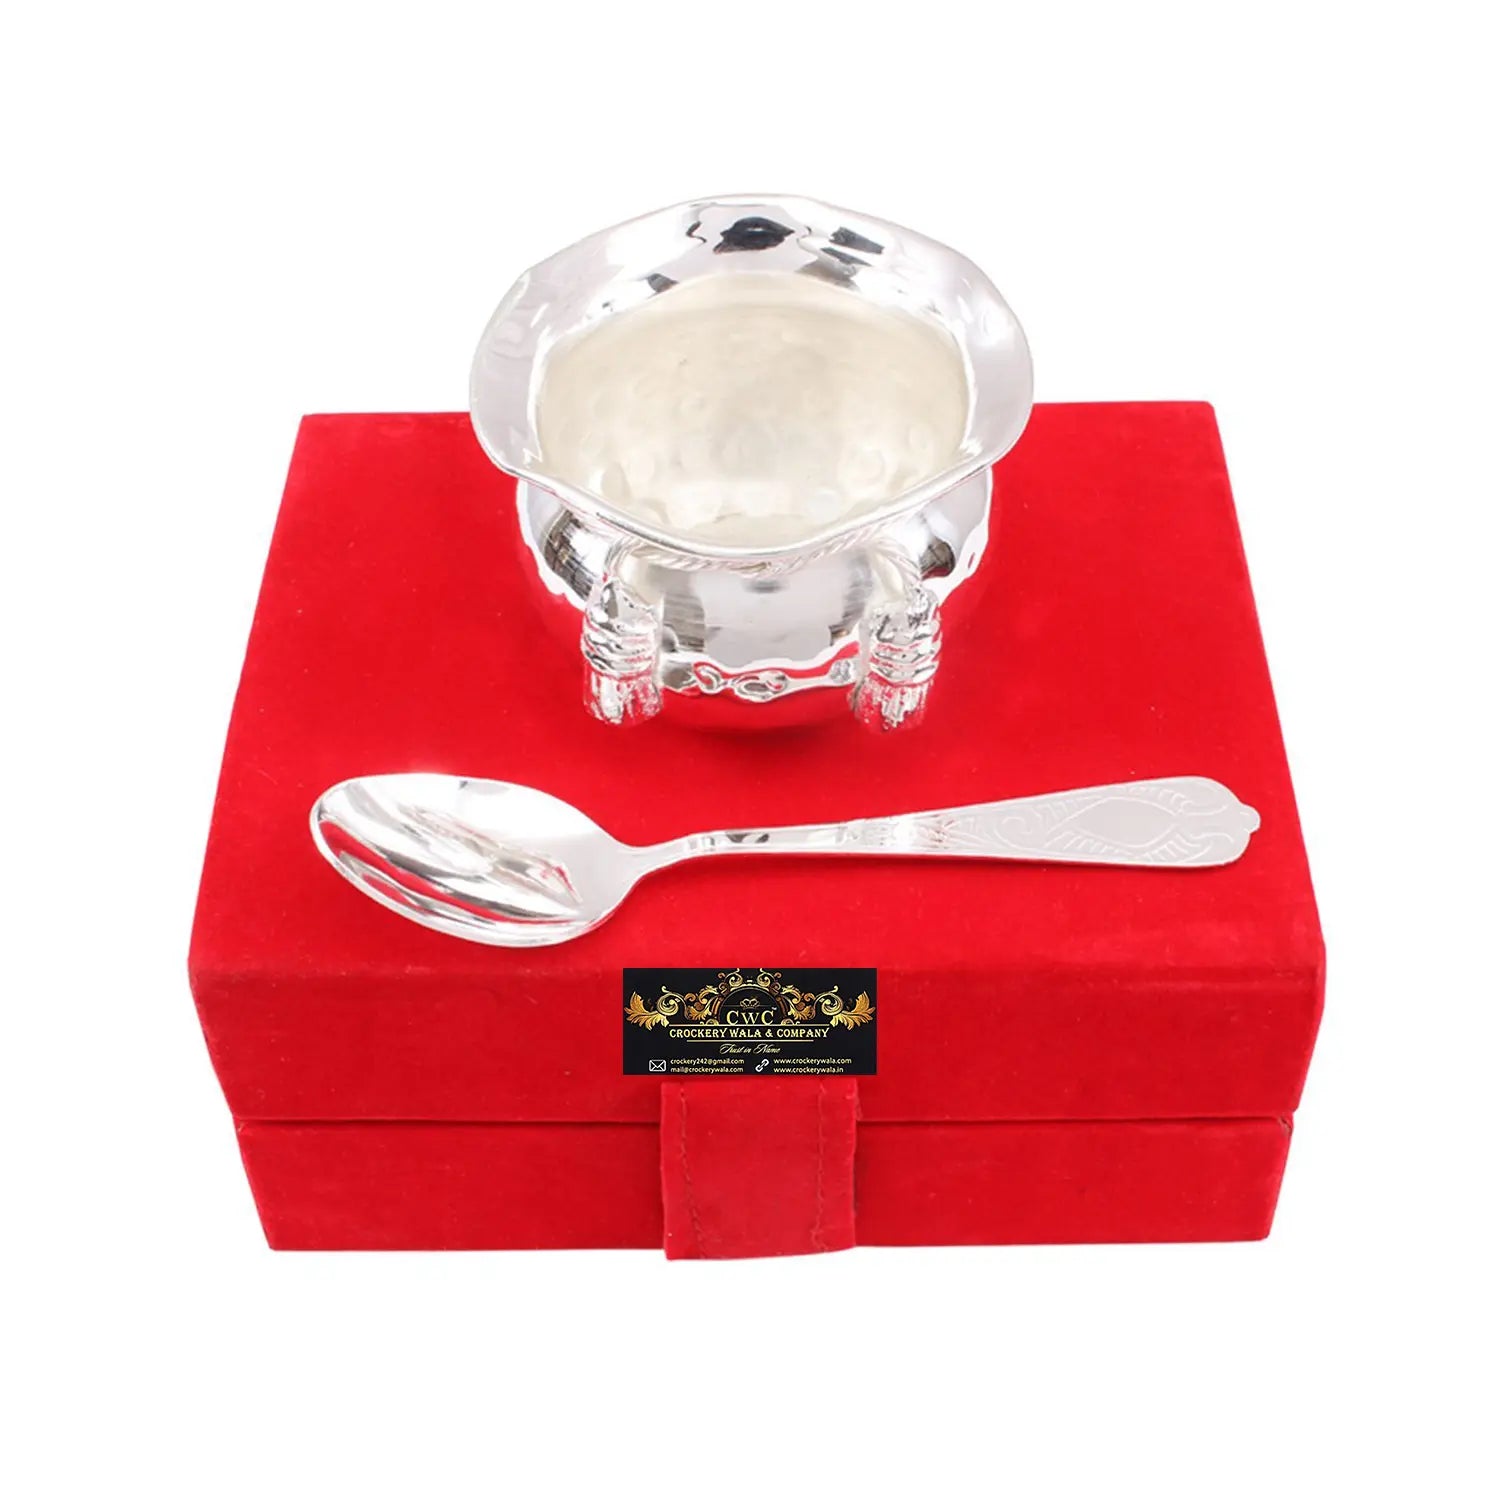 Crockery Wala And Company  Silver Plated Set of 1 M Design Bowl with 1 Spoon | for Serving Dessert Icecream Home Hotel | Decorative Diwali Gift Item - CROCKERY WALA AND COMPANY 